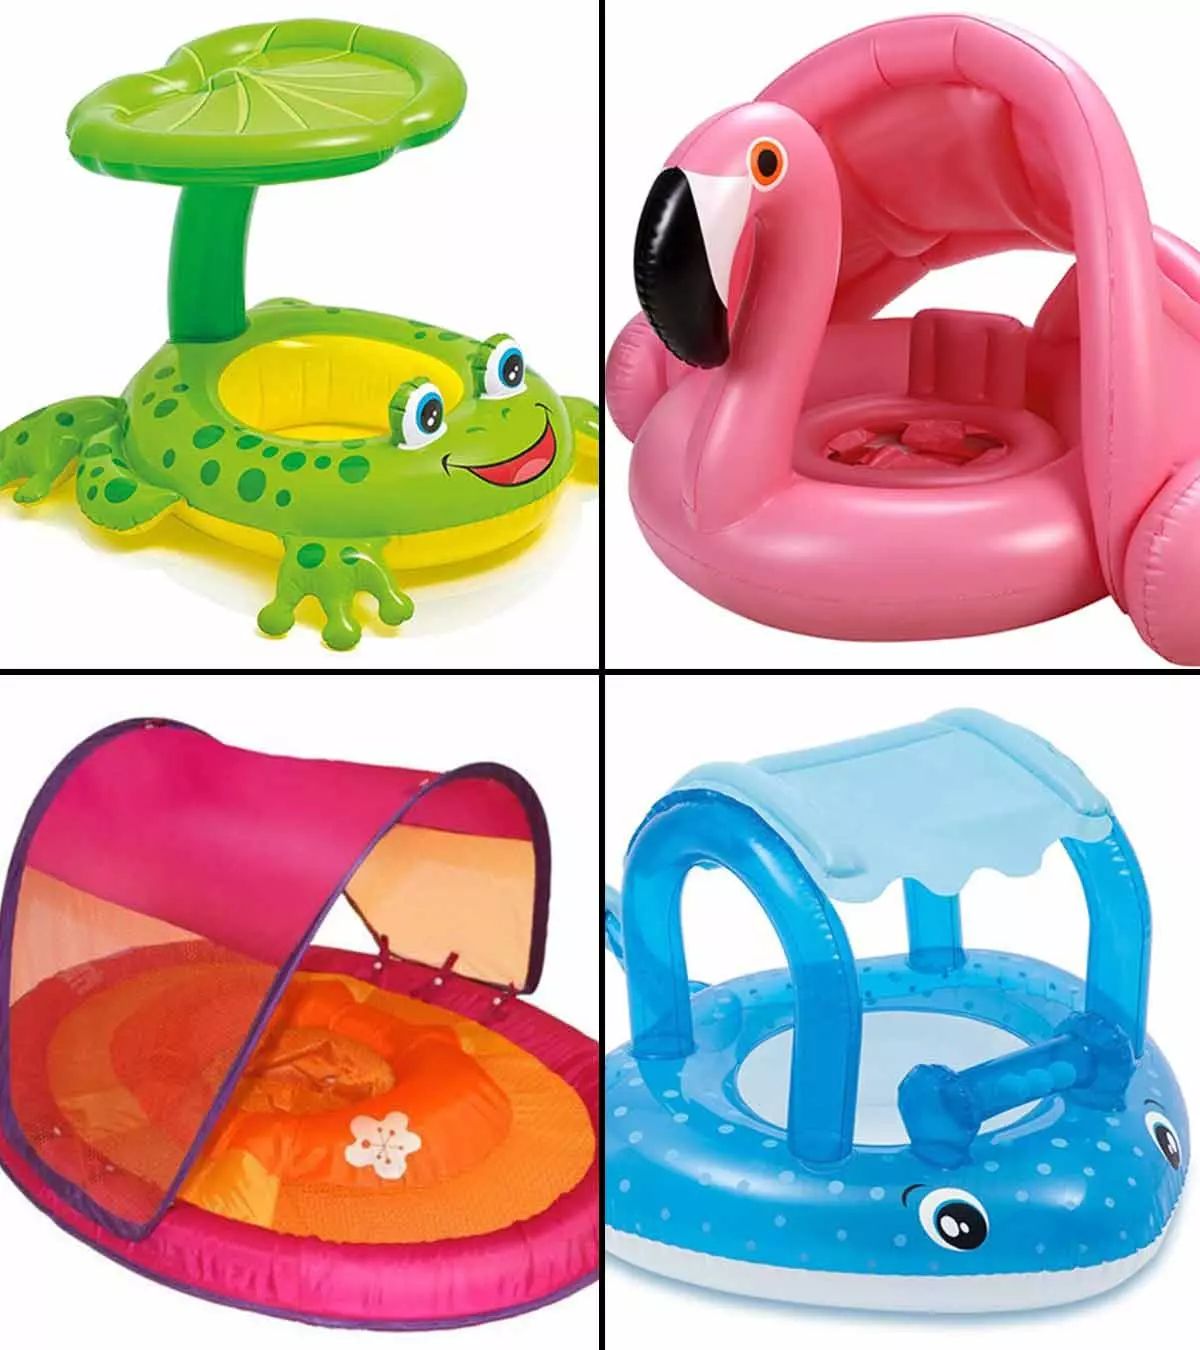 Baby floats are designed for babies to learn to swim and feel their buoyancy.